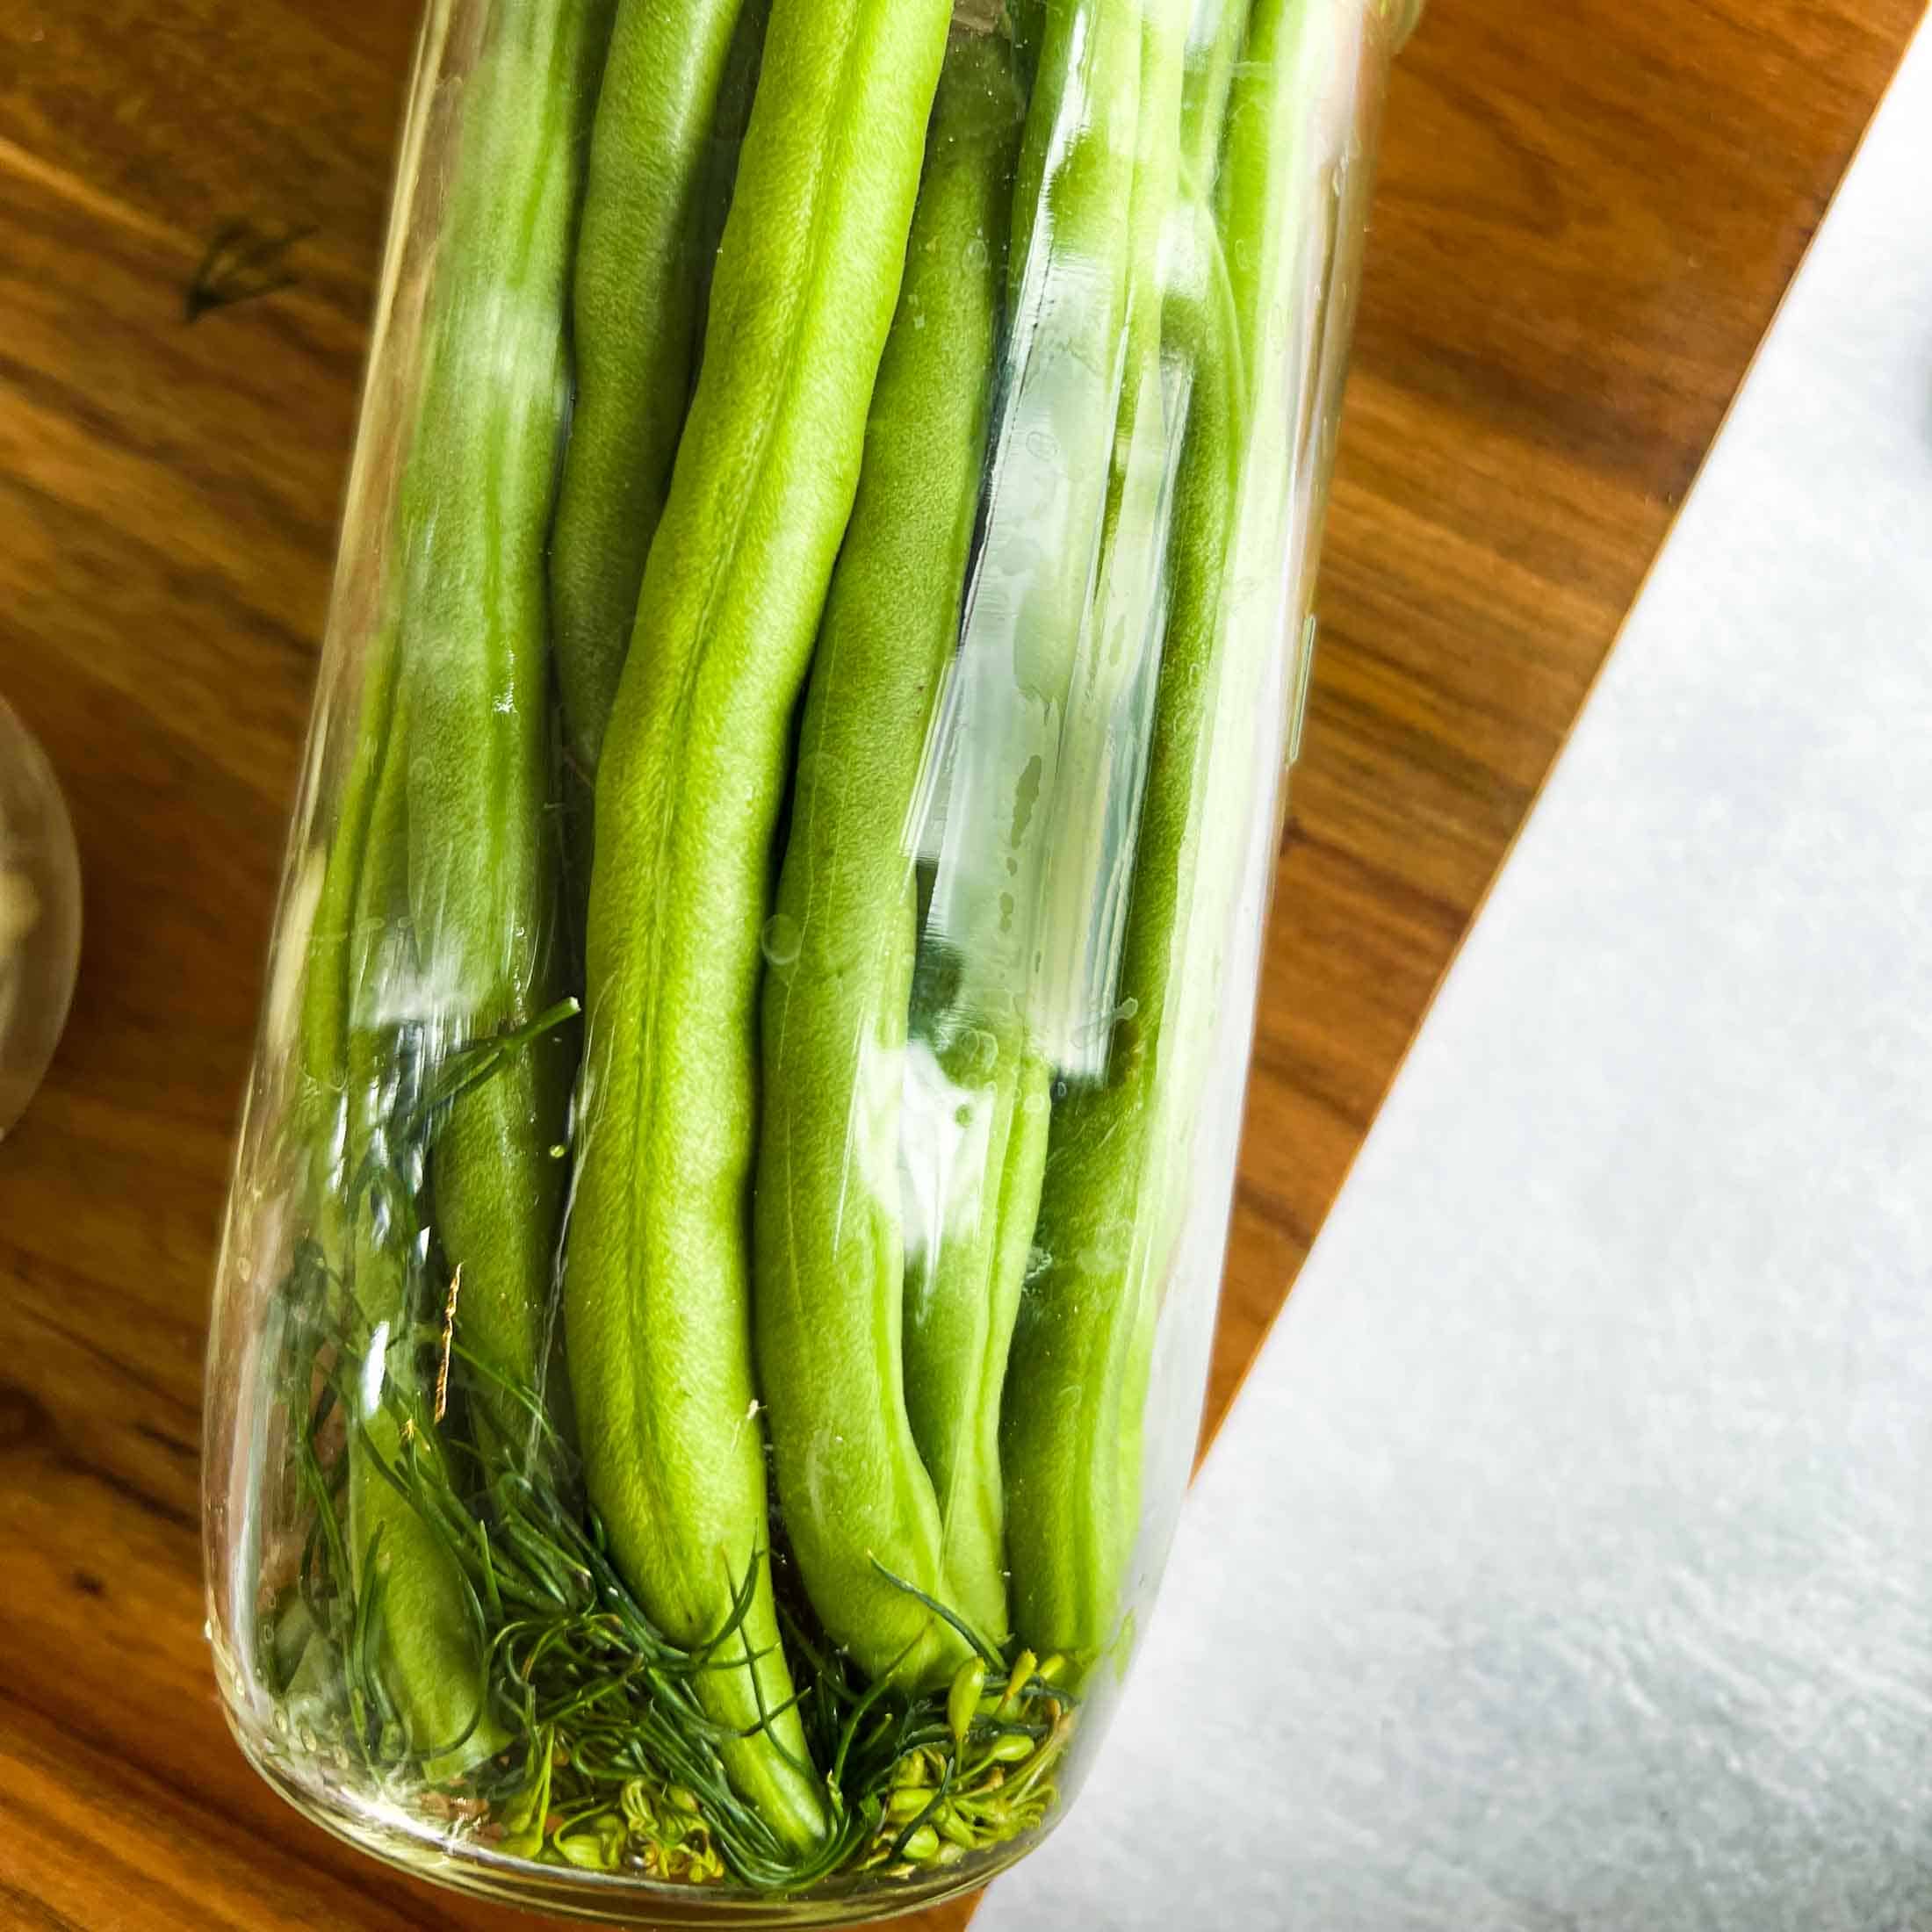 A side view of long green beans and dill in a glass jar.